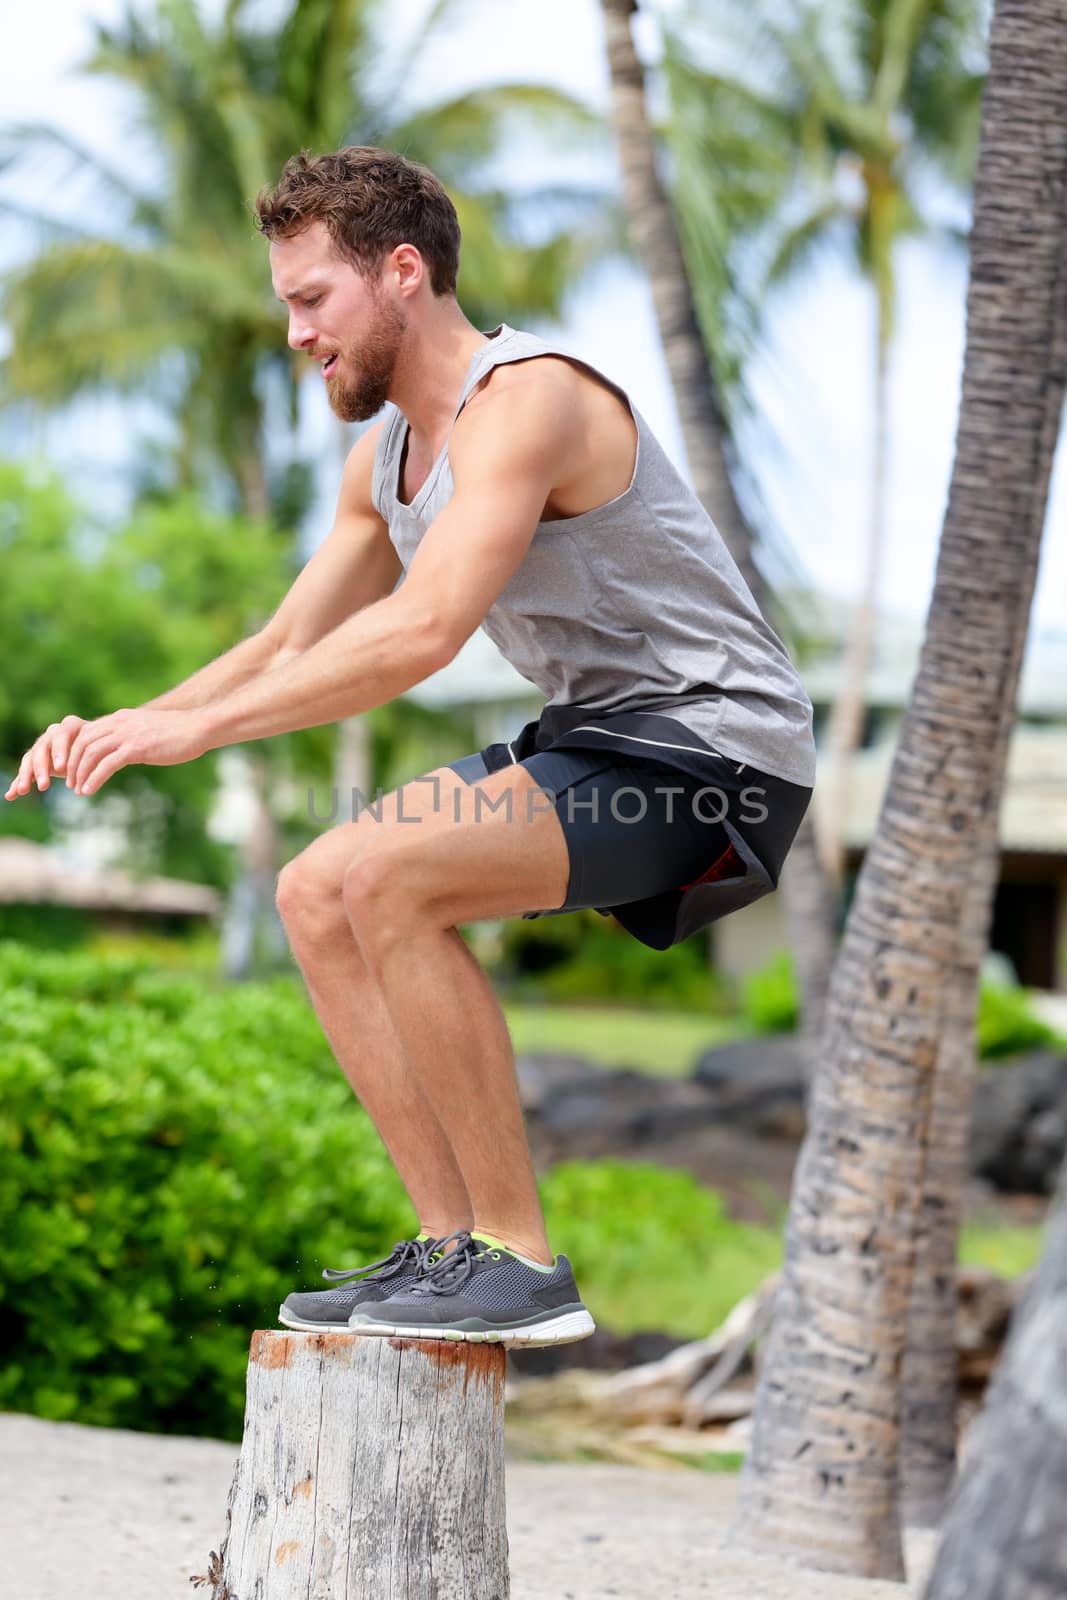 Fitness athlete bench jump squat jumping outside in nature landscape. Strength training fit male working out exercising outdoors on beach in summer doing jumping on tree trunk.